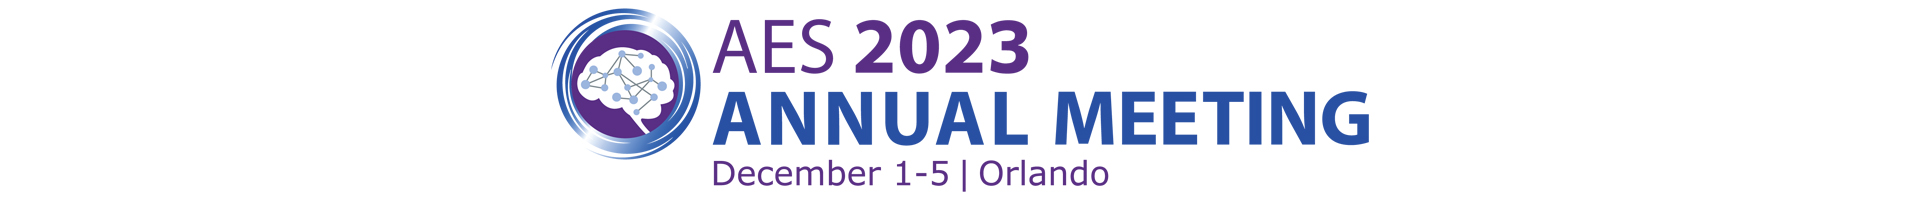 AES 2023 Annual Meeting Event Banner